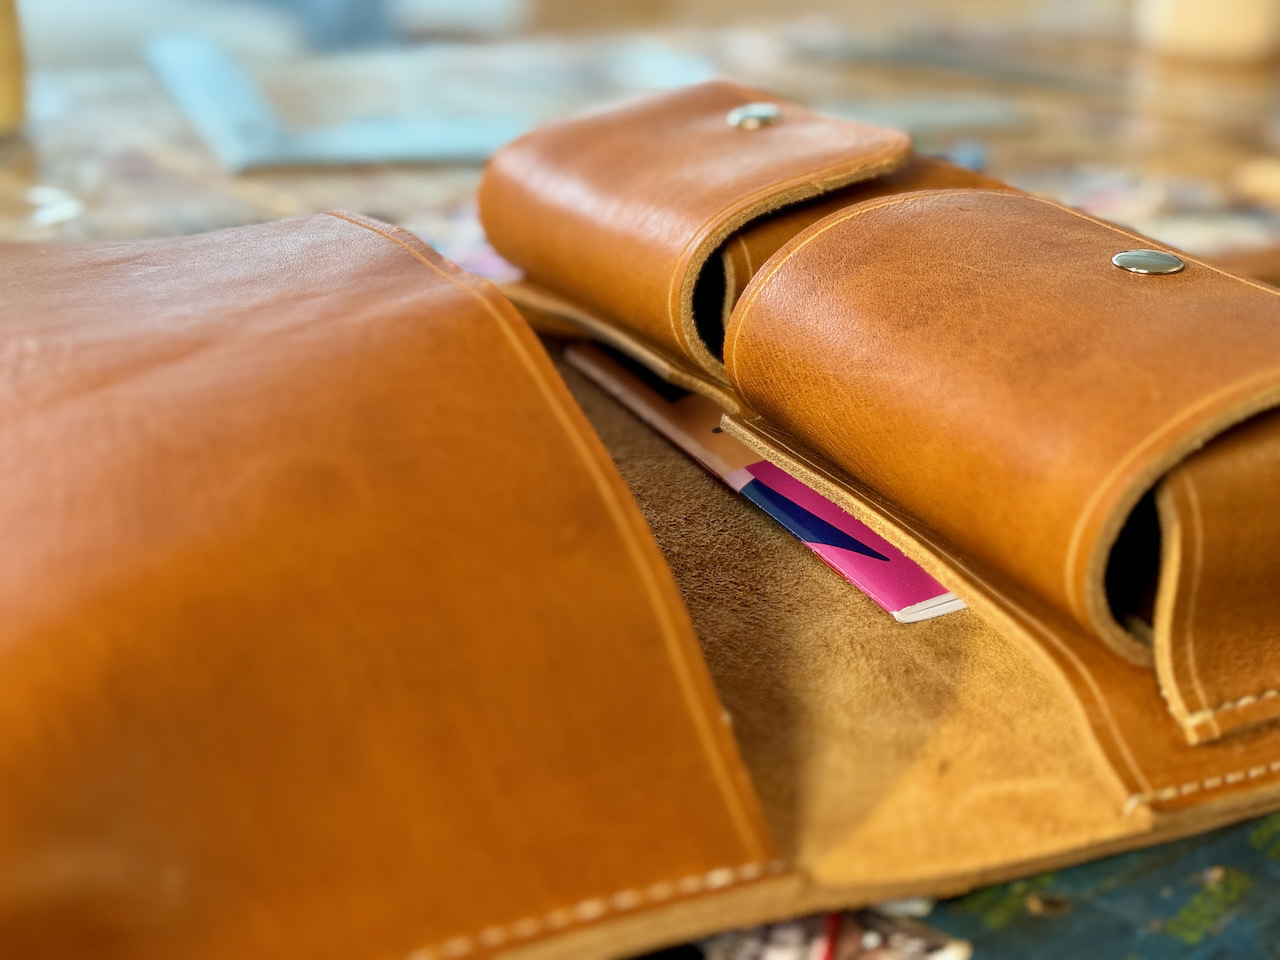 Field Notes notebook stowed in inner pocket of leather cigar case